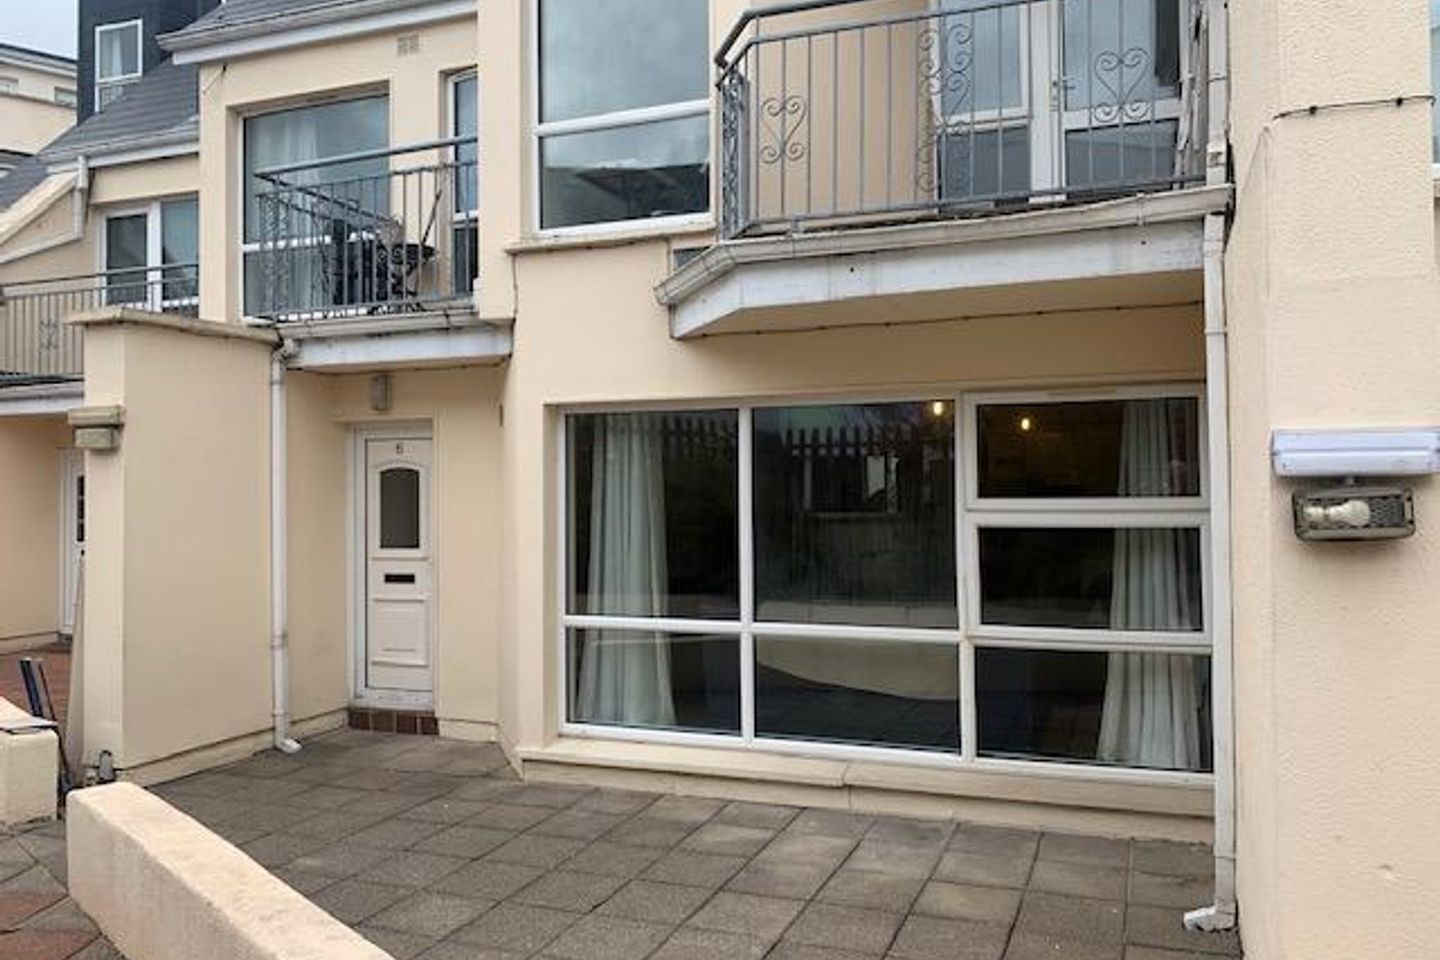 Apartment 6, Clan House, Galway City, Co. Galway, H91PNE4